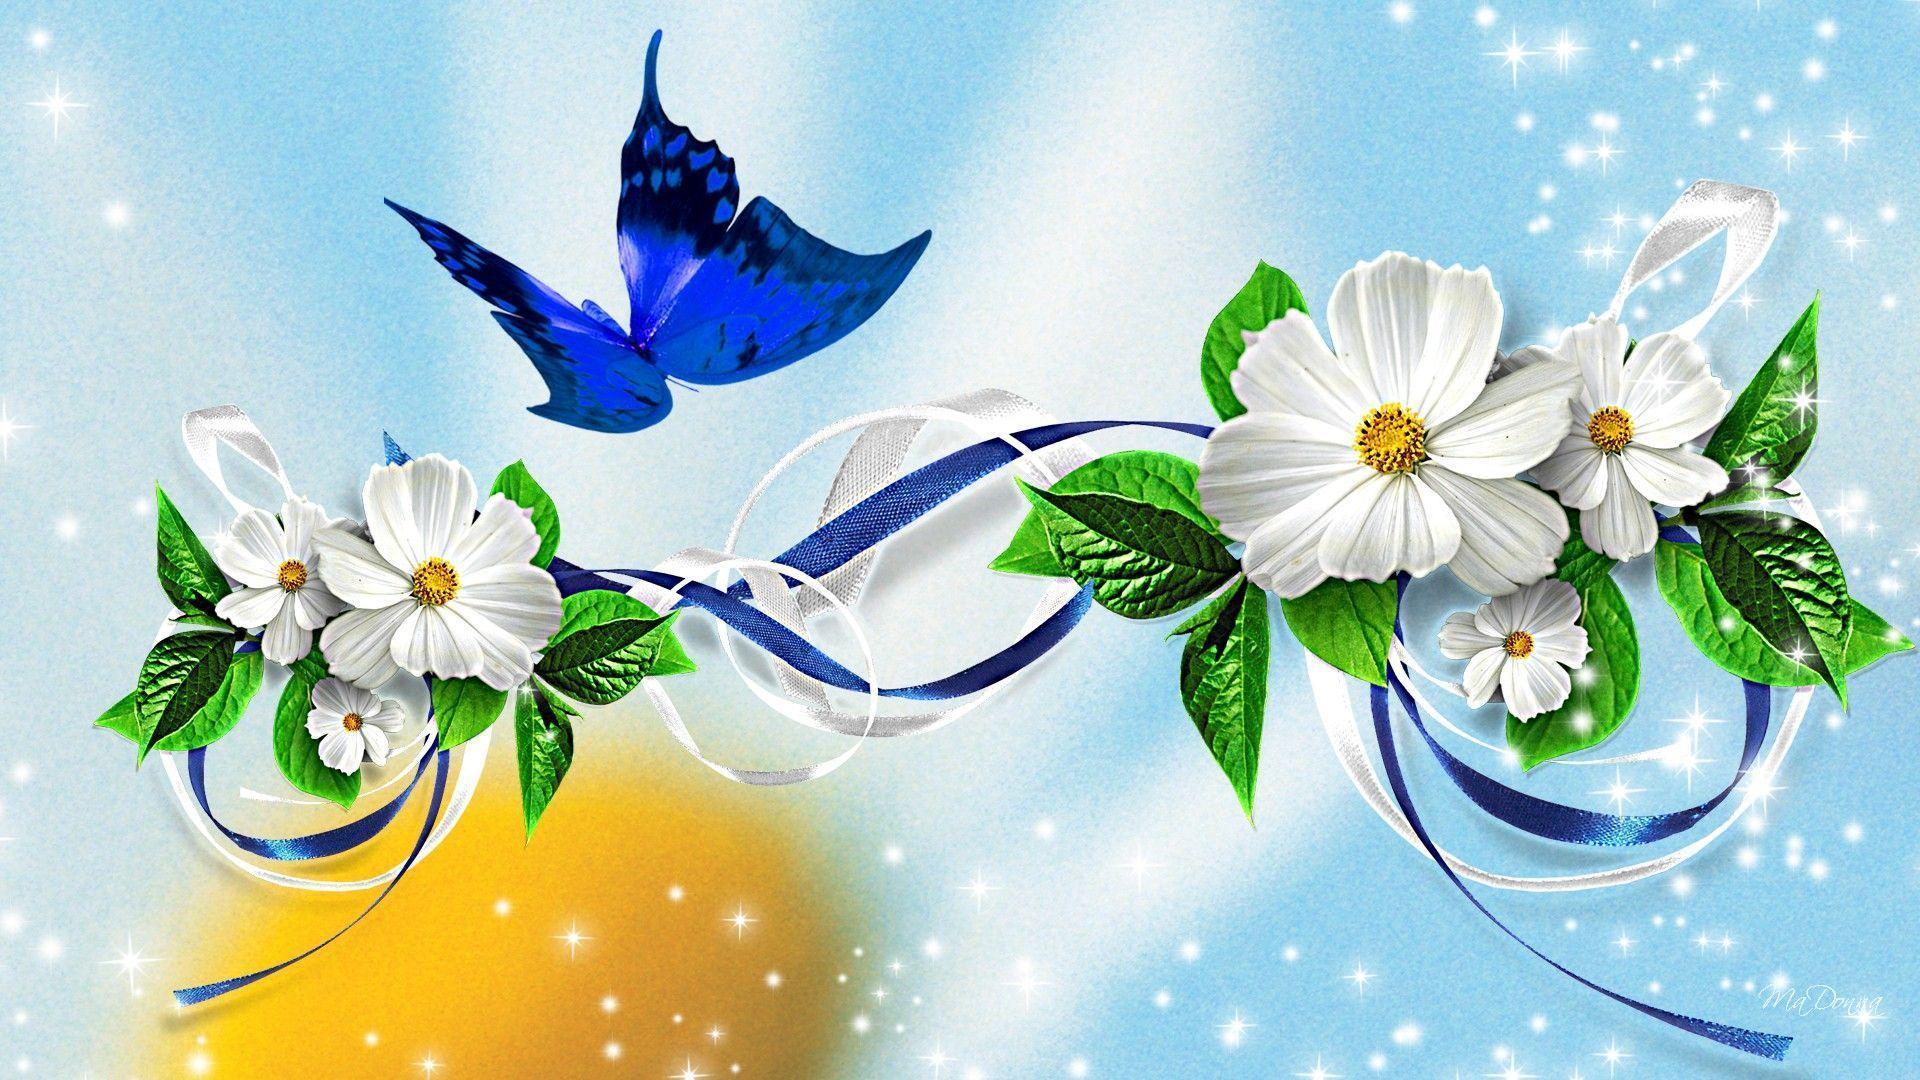 Wallpapers For > Flower With Butterfly Wallpapers Hd